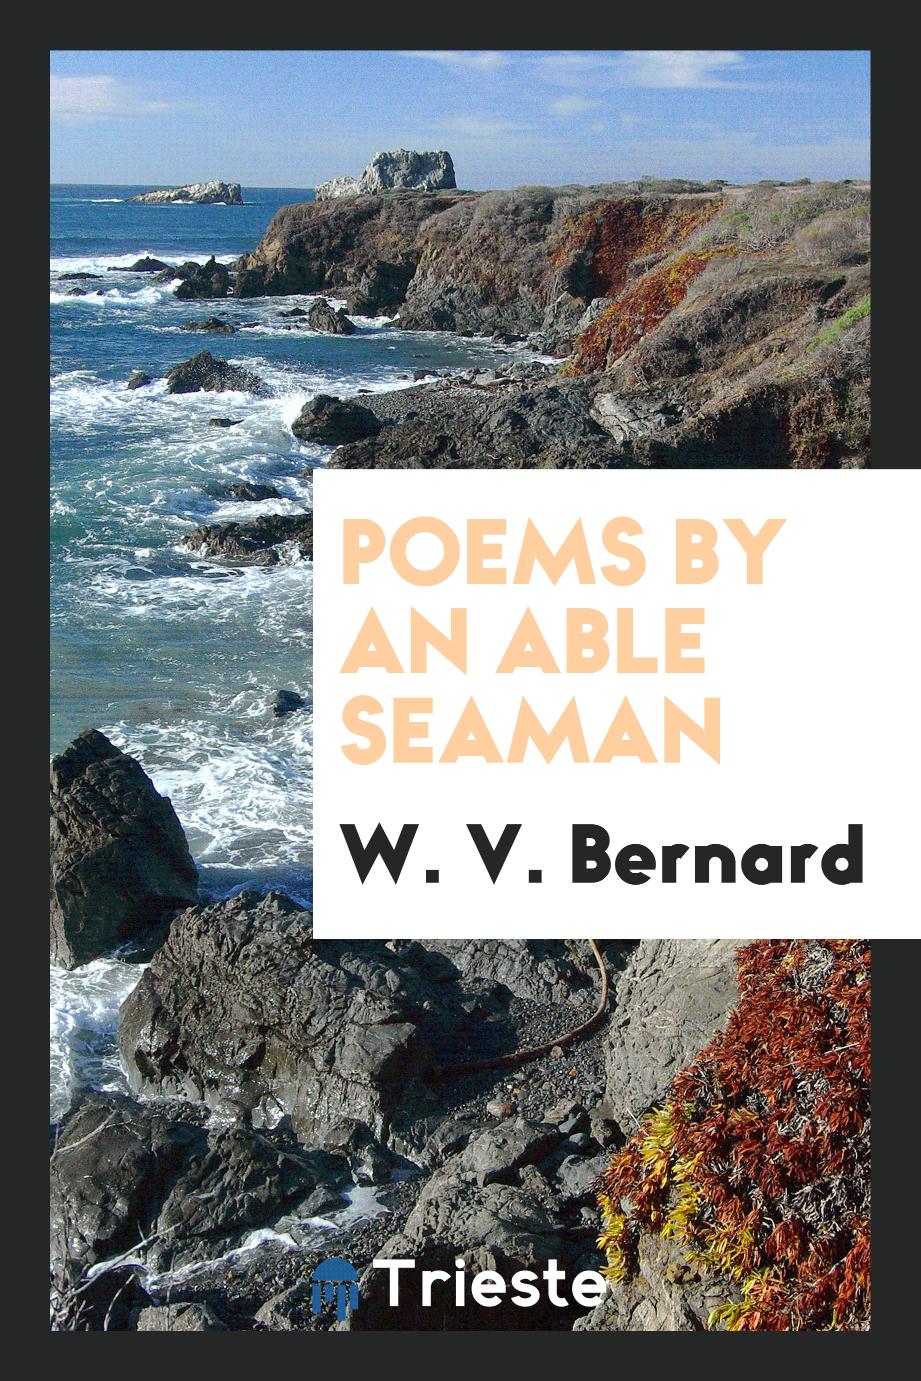 Poems by an able seaman